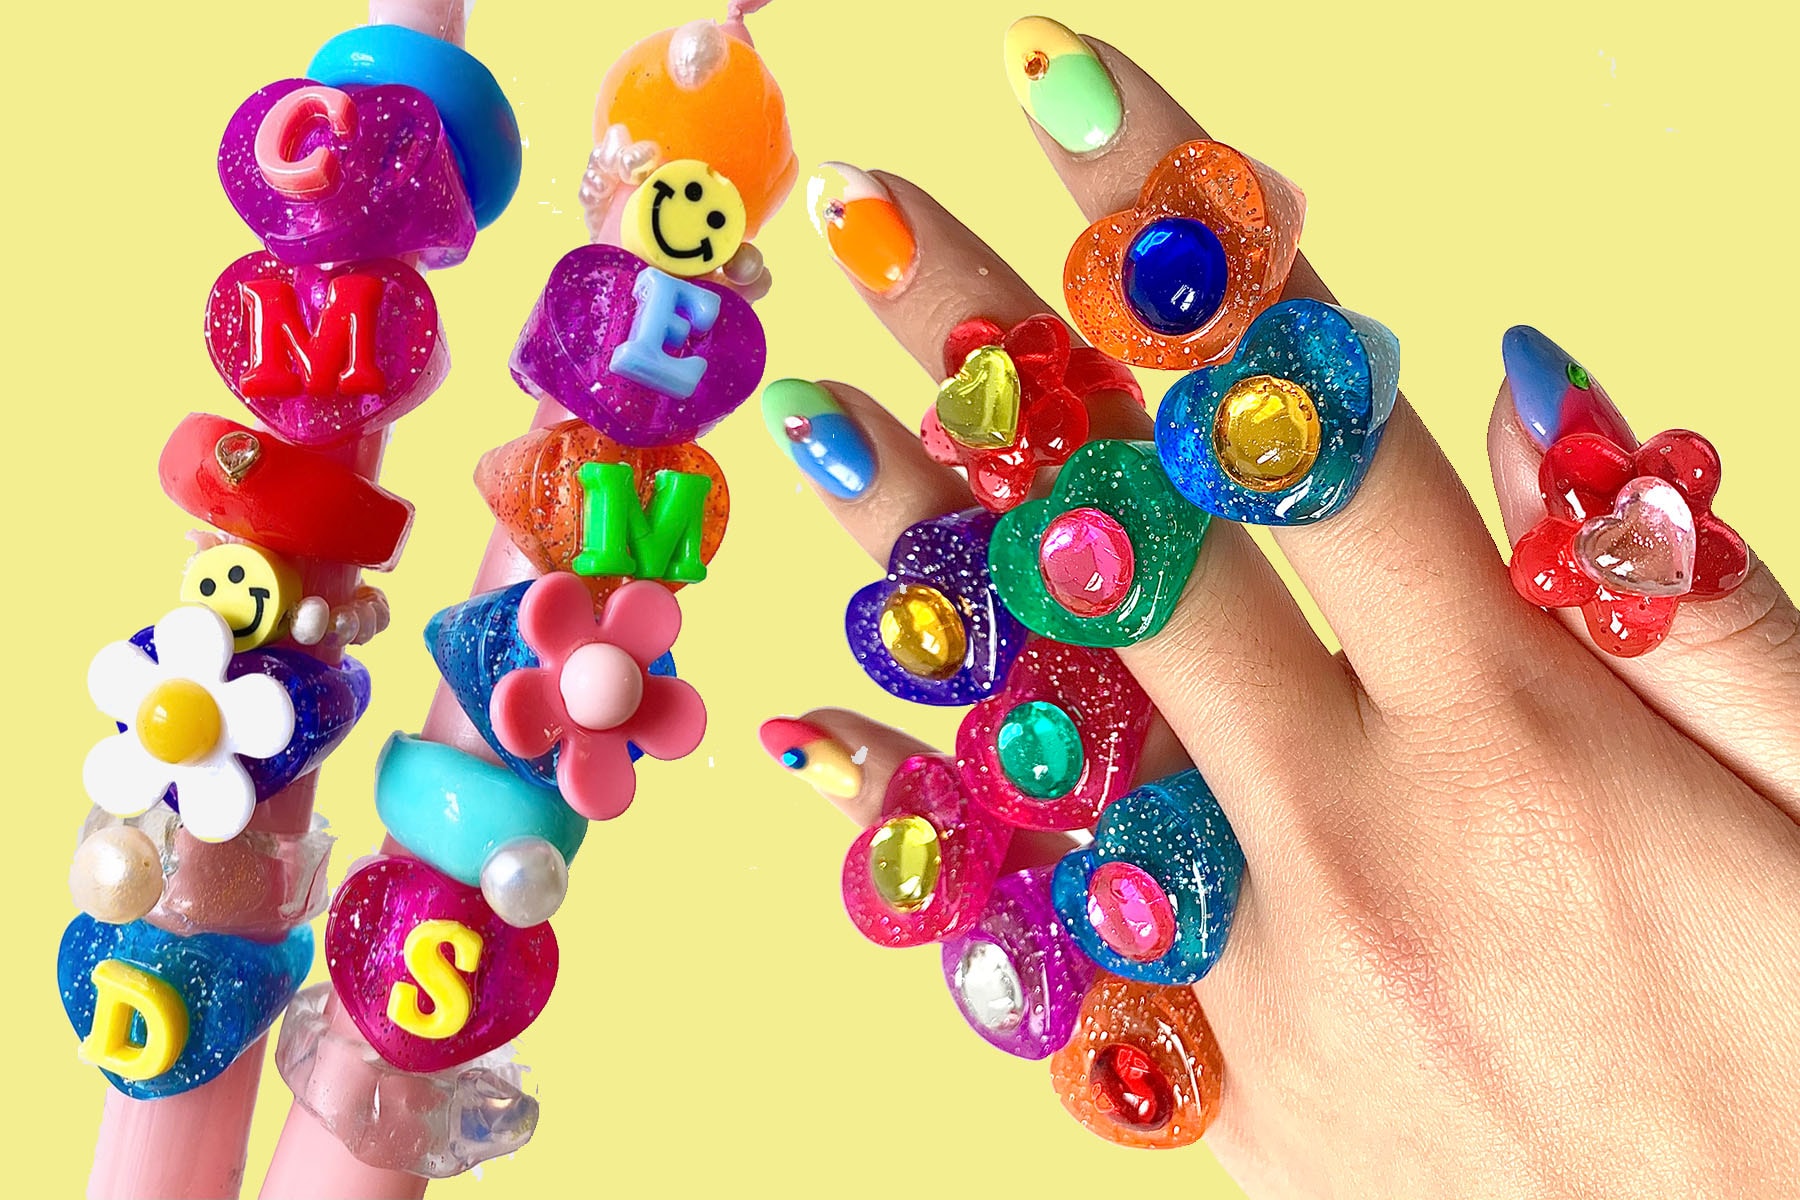 Where To Buy Colorful Chunky Rings 90s Inspired Jewelry Instagram Rings Necklaces Charms Fun 